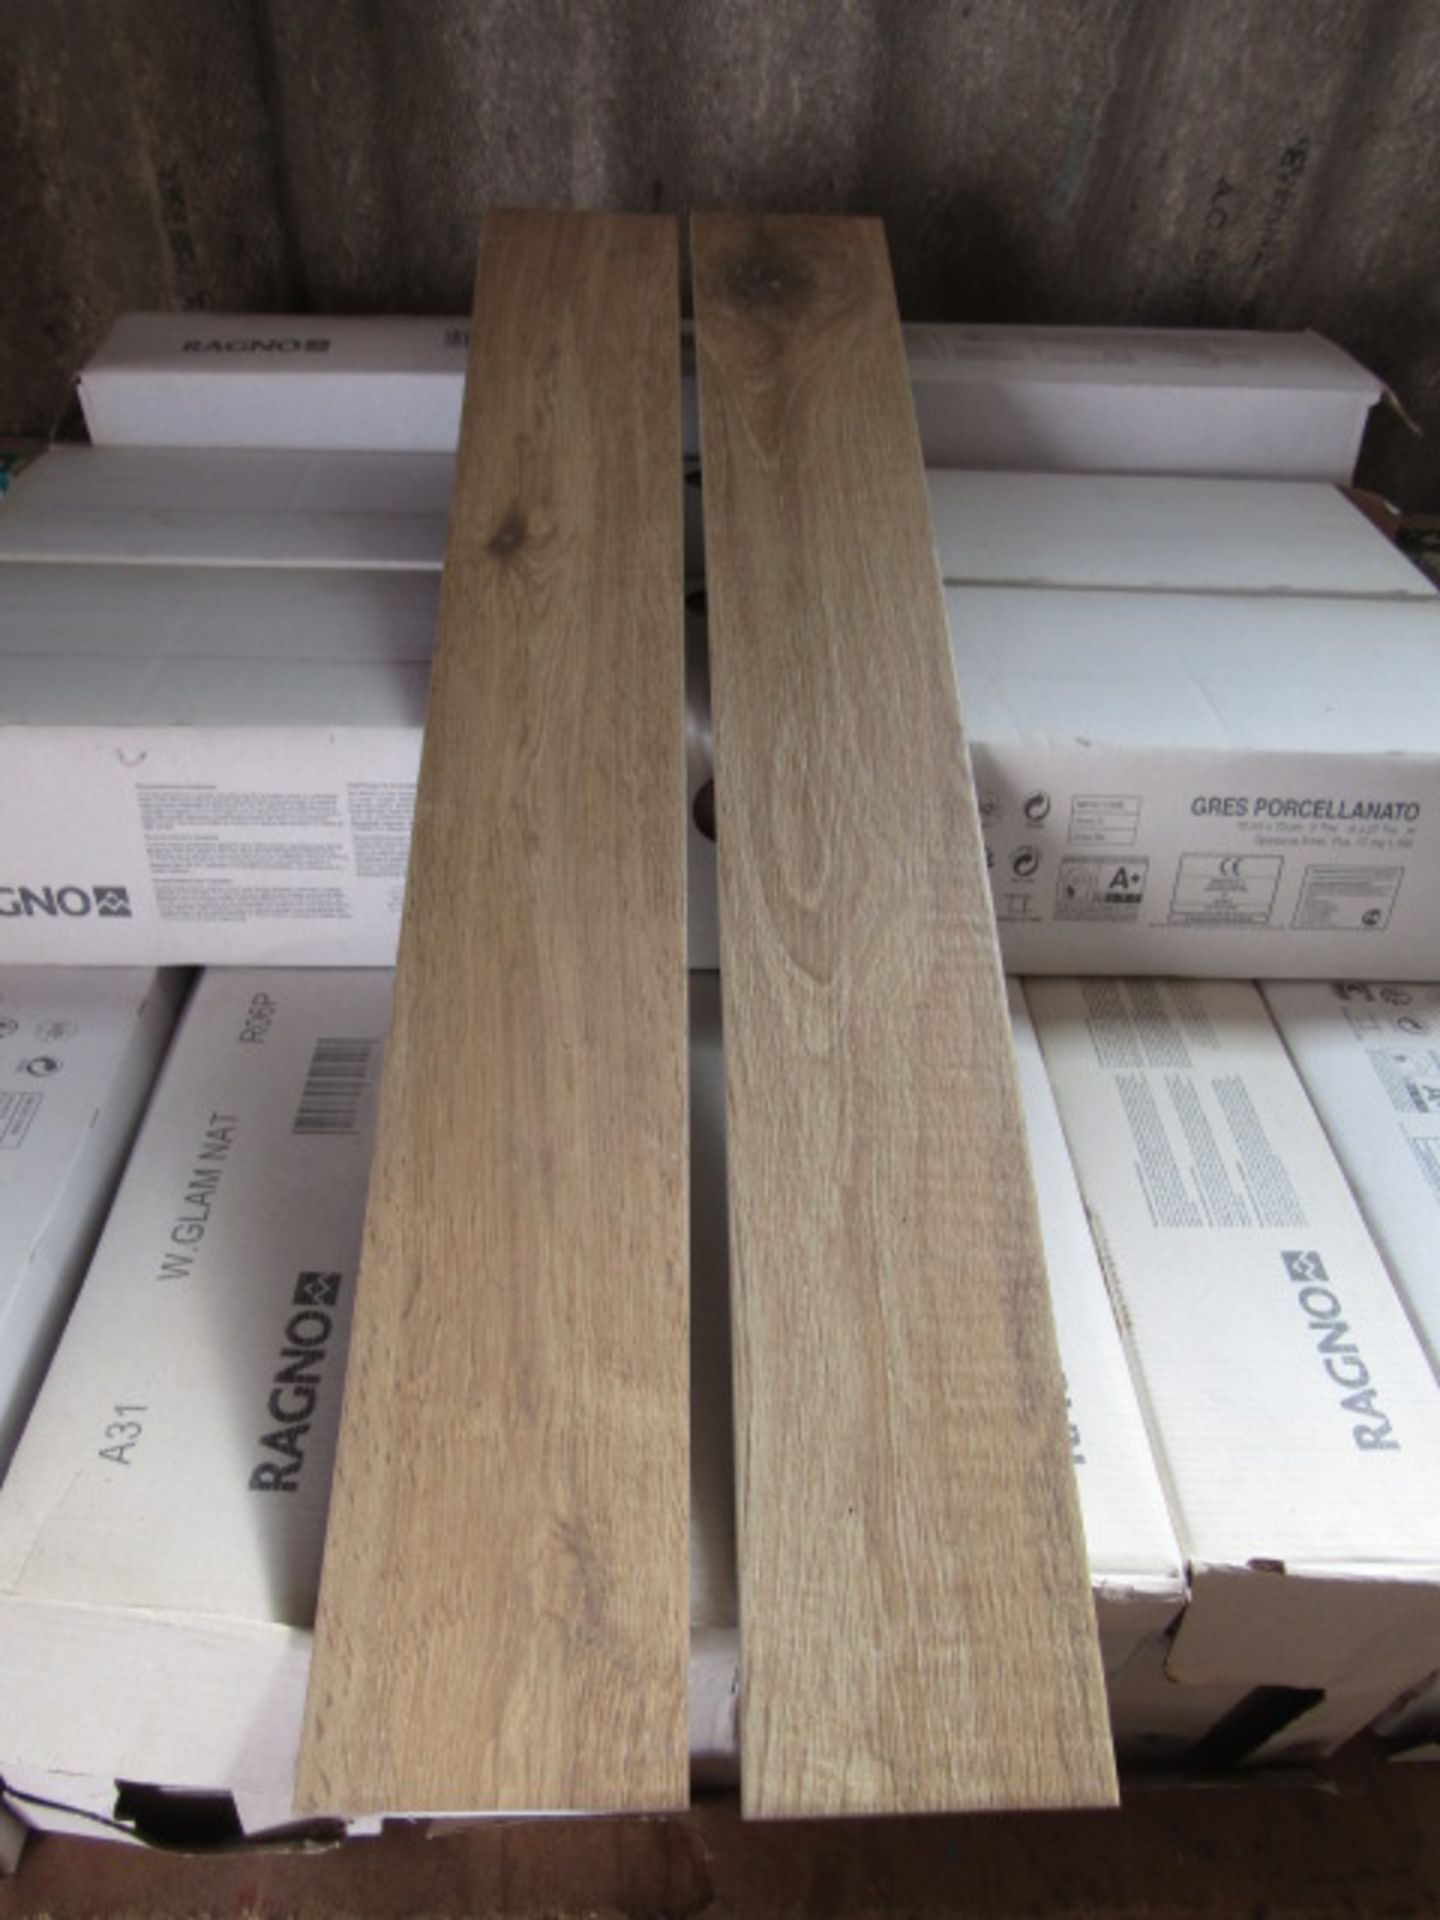 Porcelain floor tiles in wood effect 13 boxes with 2 loose, should cover approx 15m2 tile sizes in - Image 4 of 5